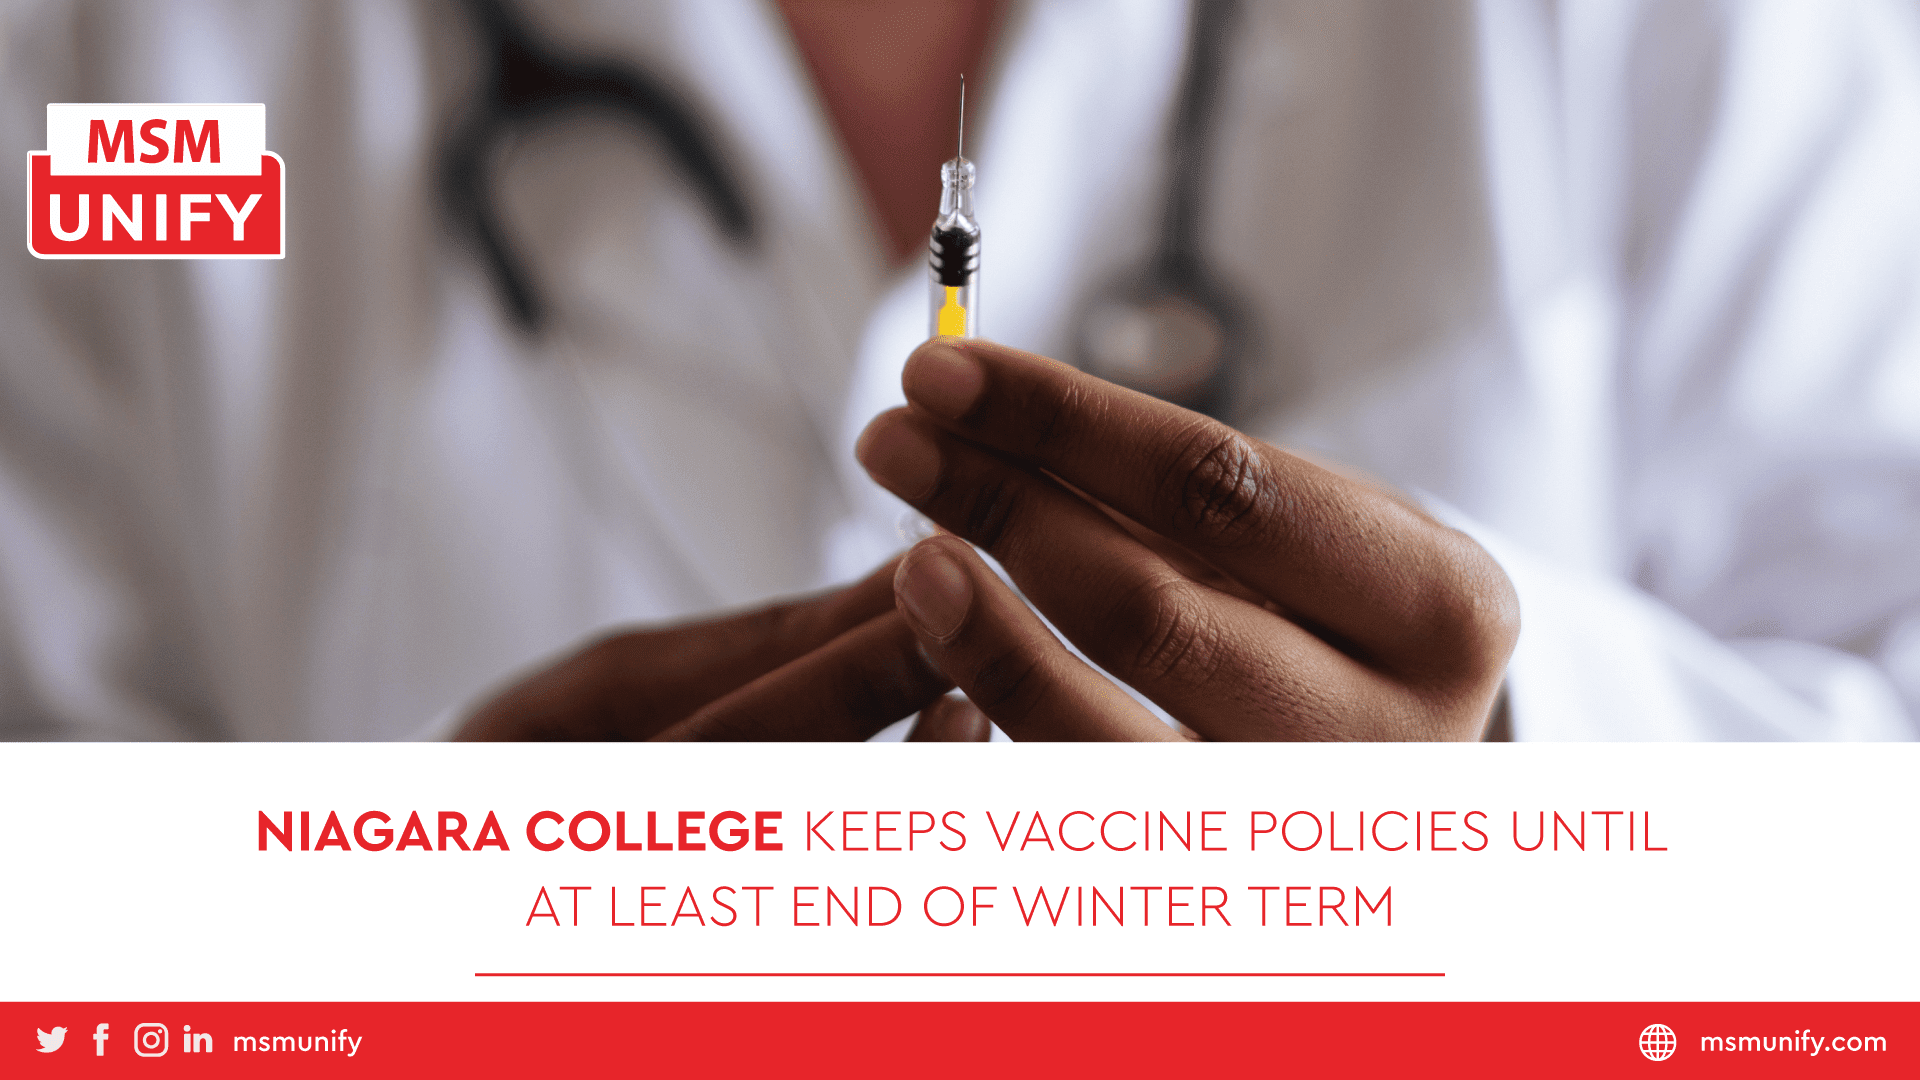 MSM Unify Niagara College Keeps Vaccine Policies Until At Least End of Winter Term min